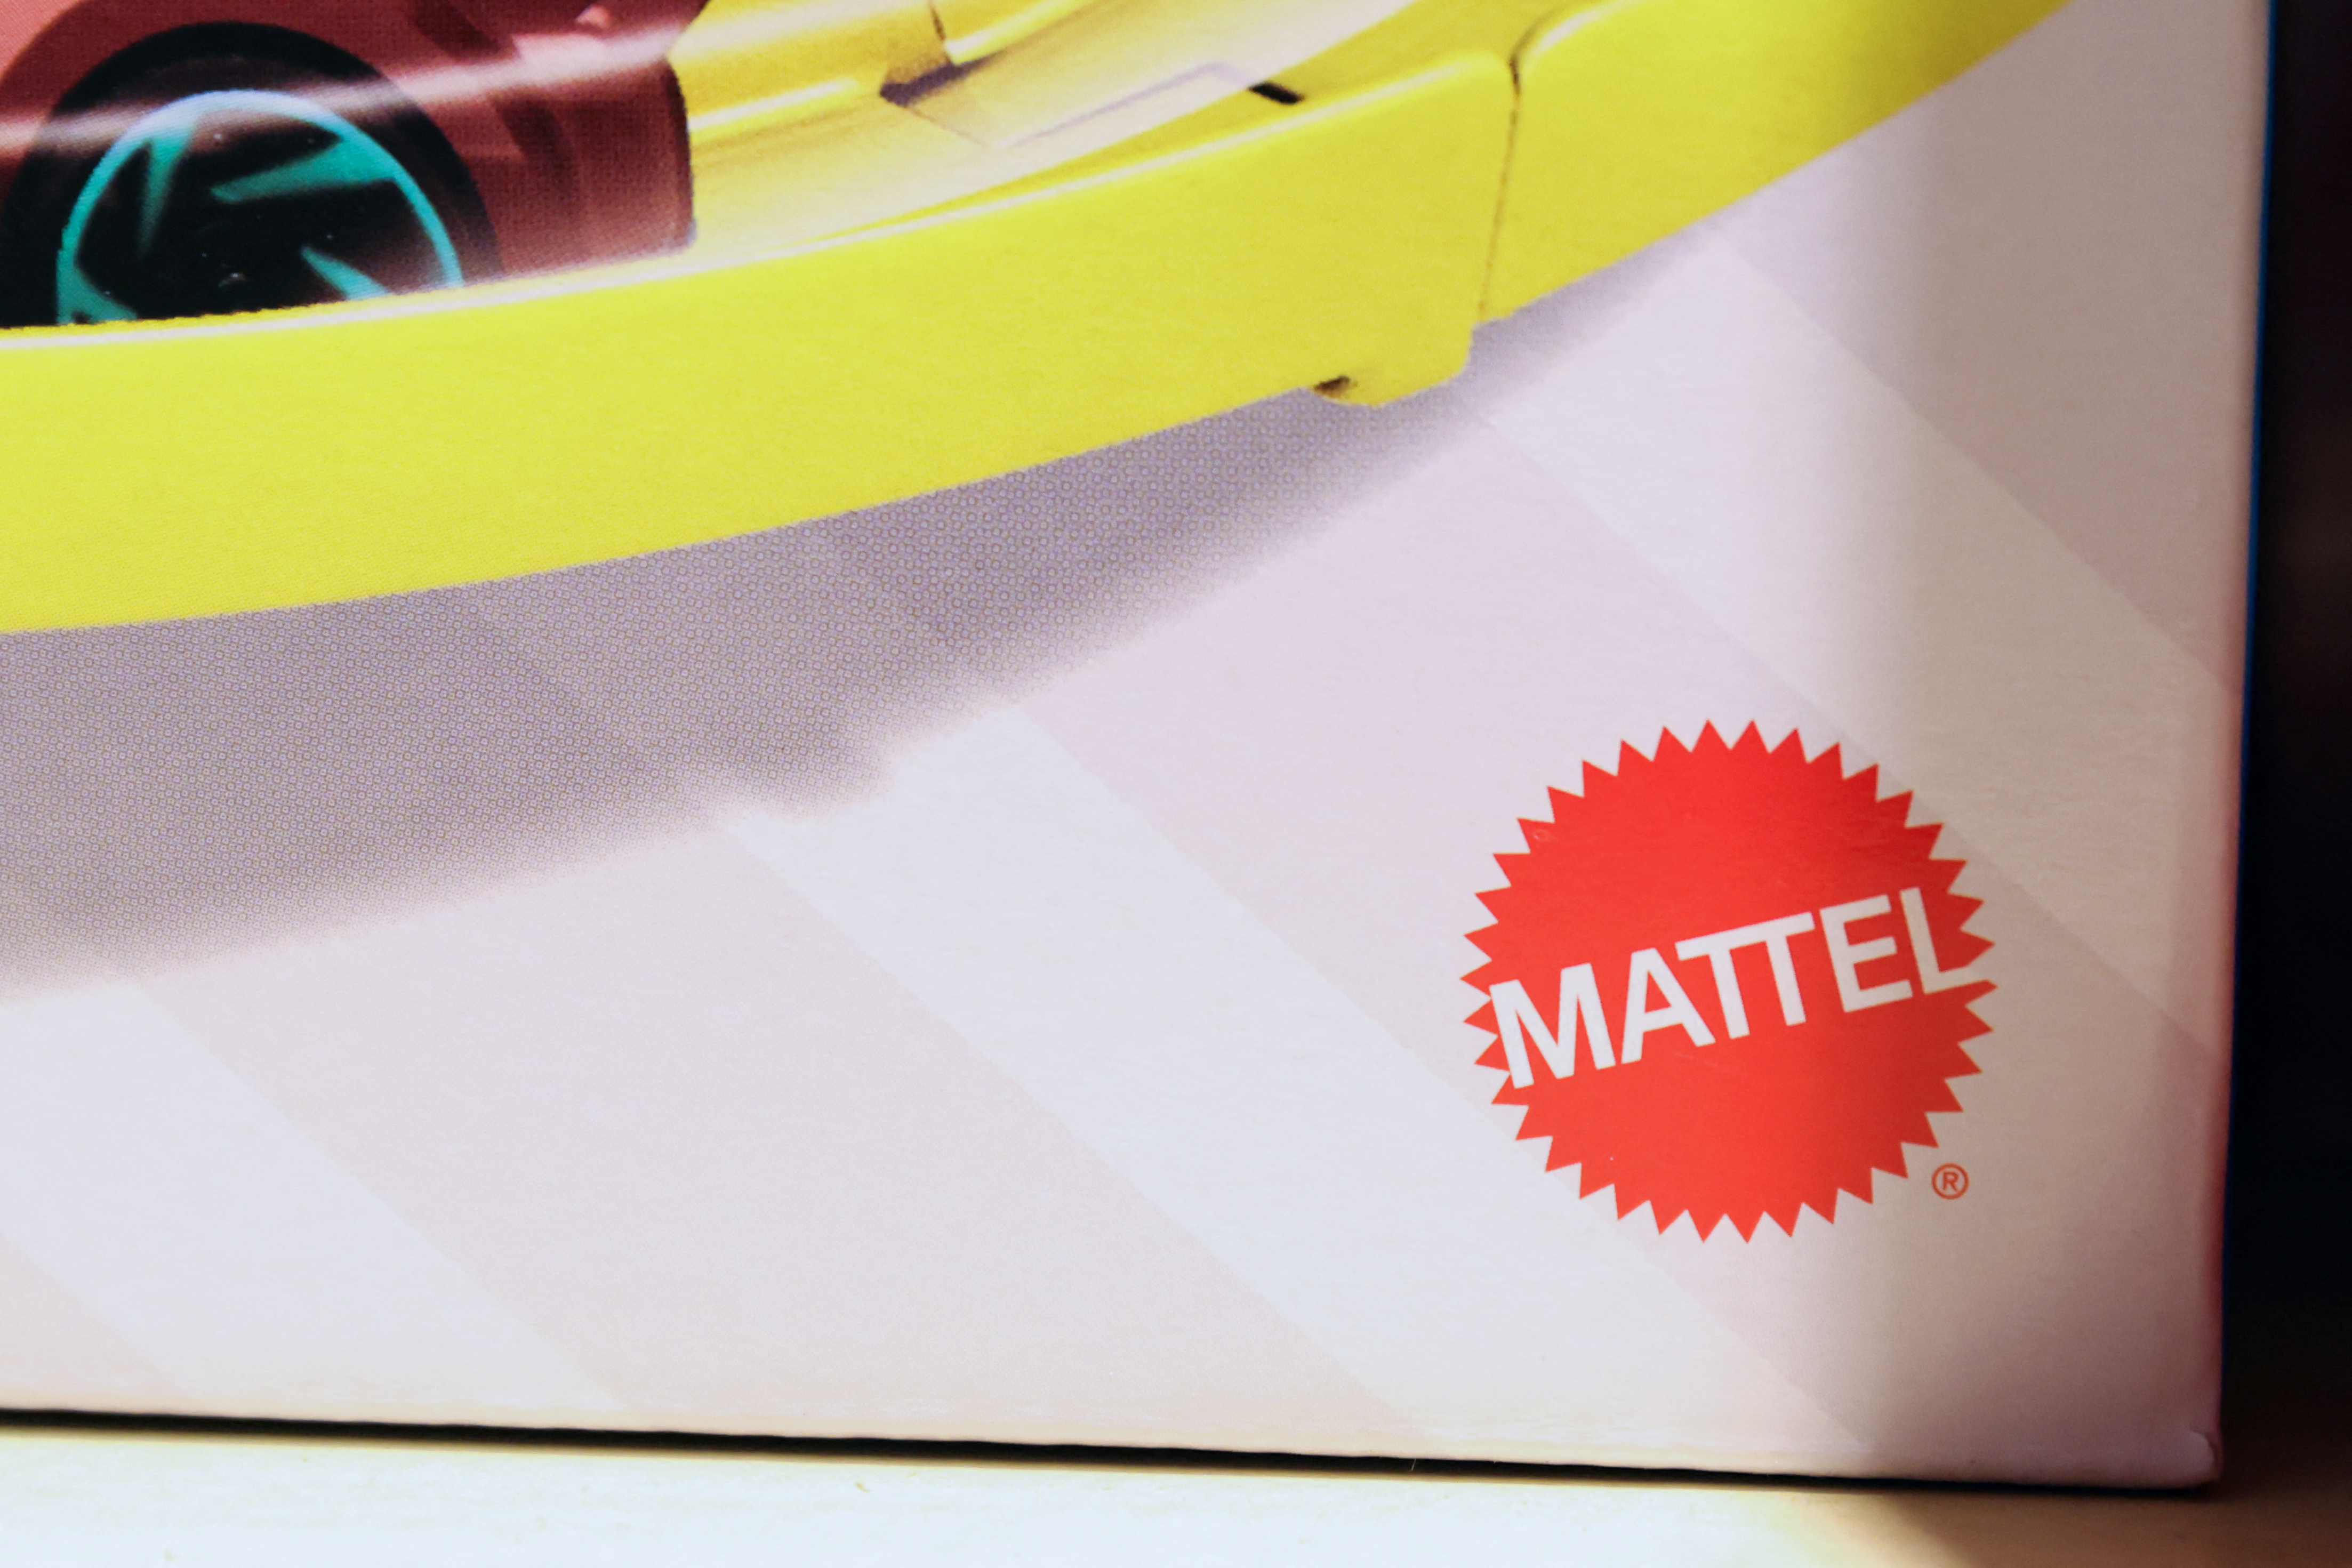 The Mattel logo is seen on a toy for sale in the Kidding Around toy store Manhattan, New York City